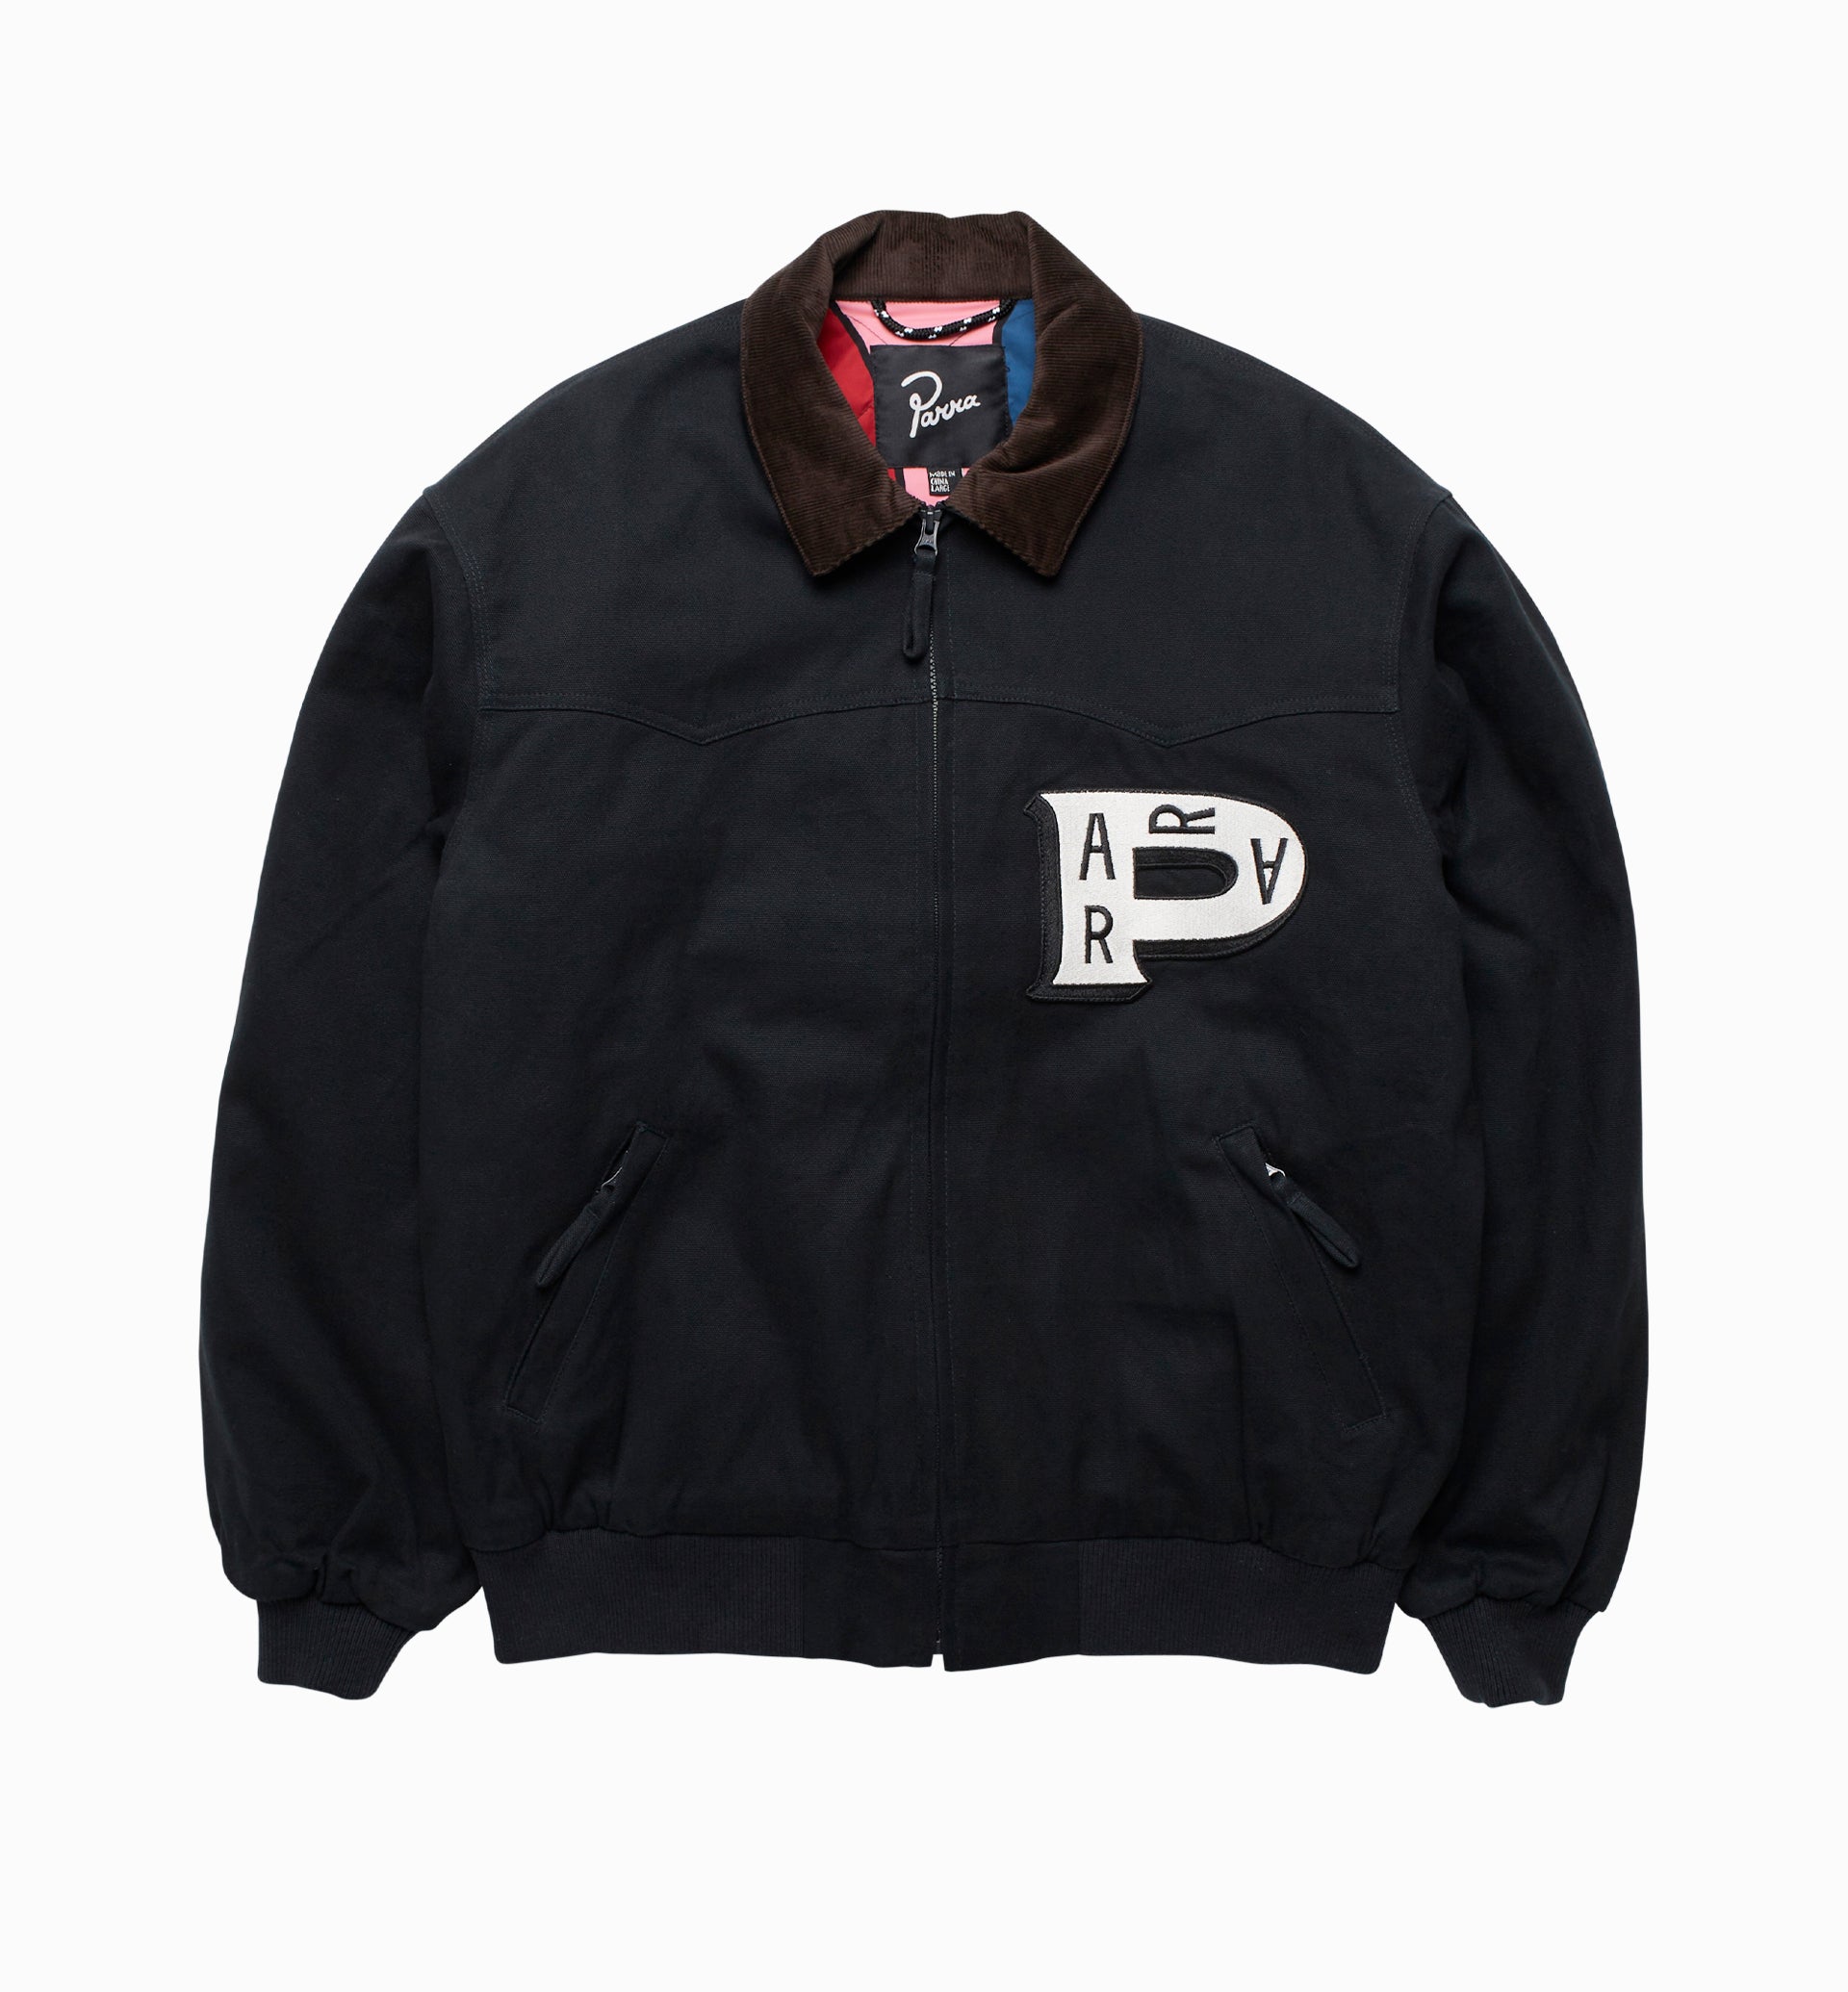 by Parra Worked P Jacket 'Navy'